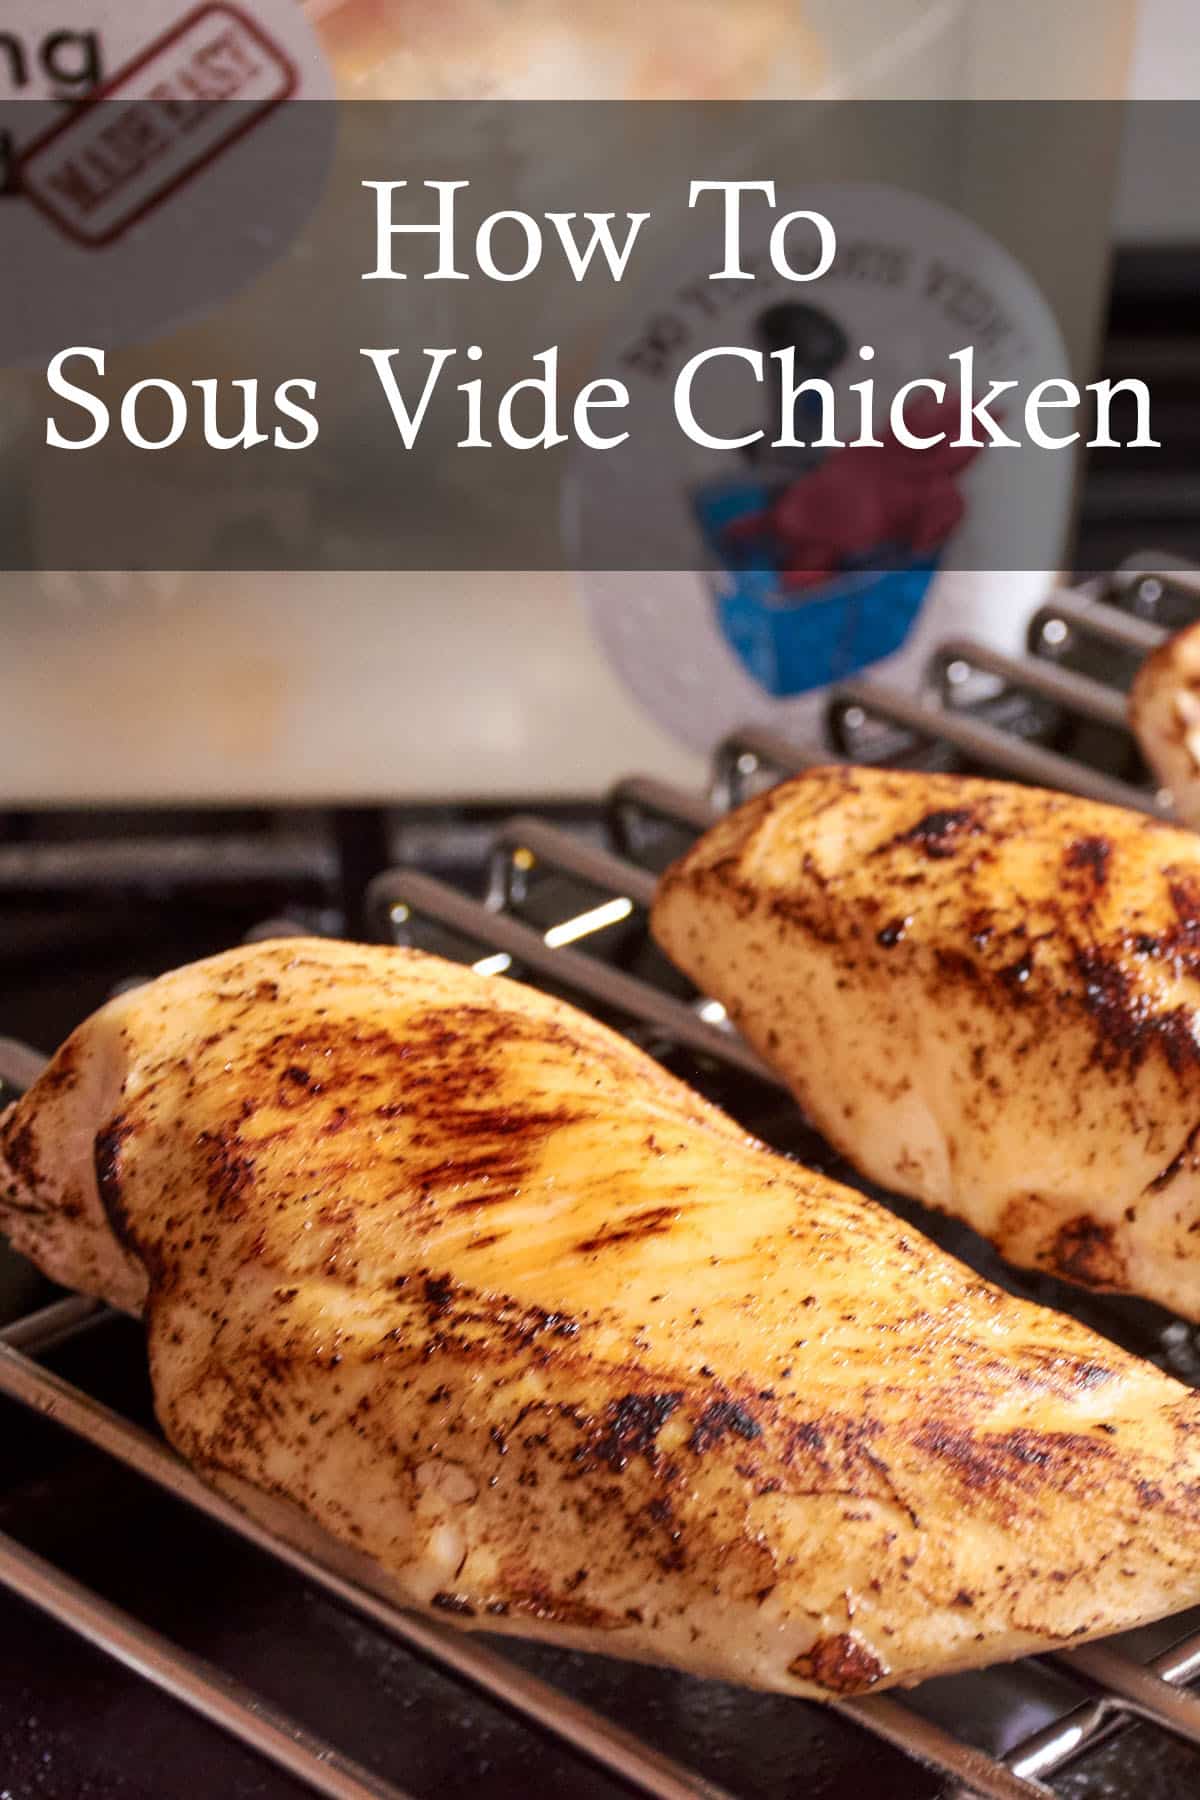 How To Sous Vide Chicken